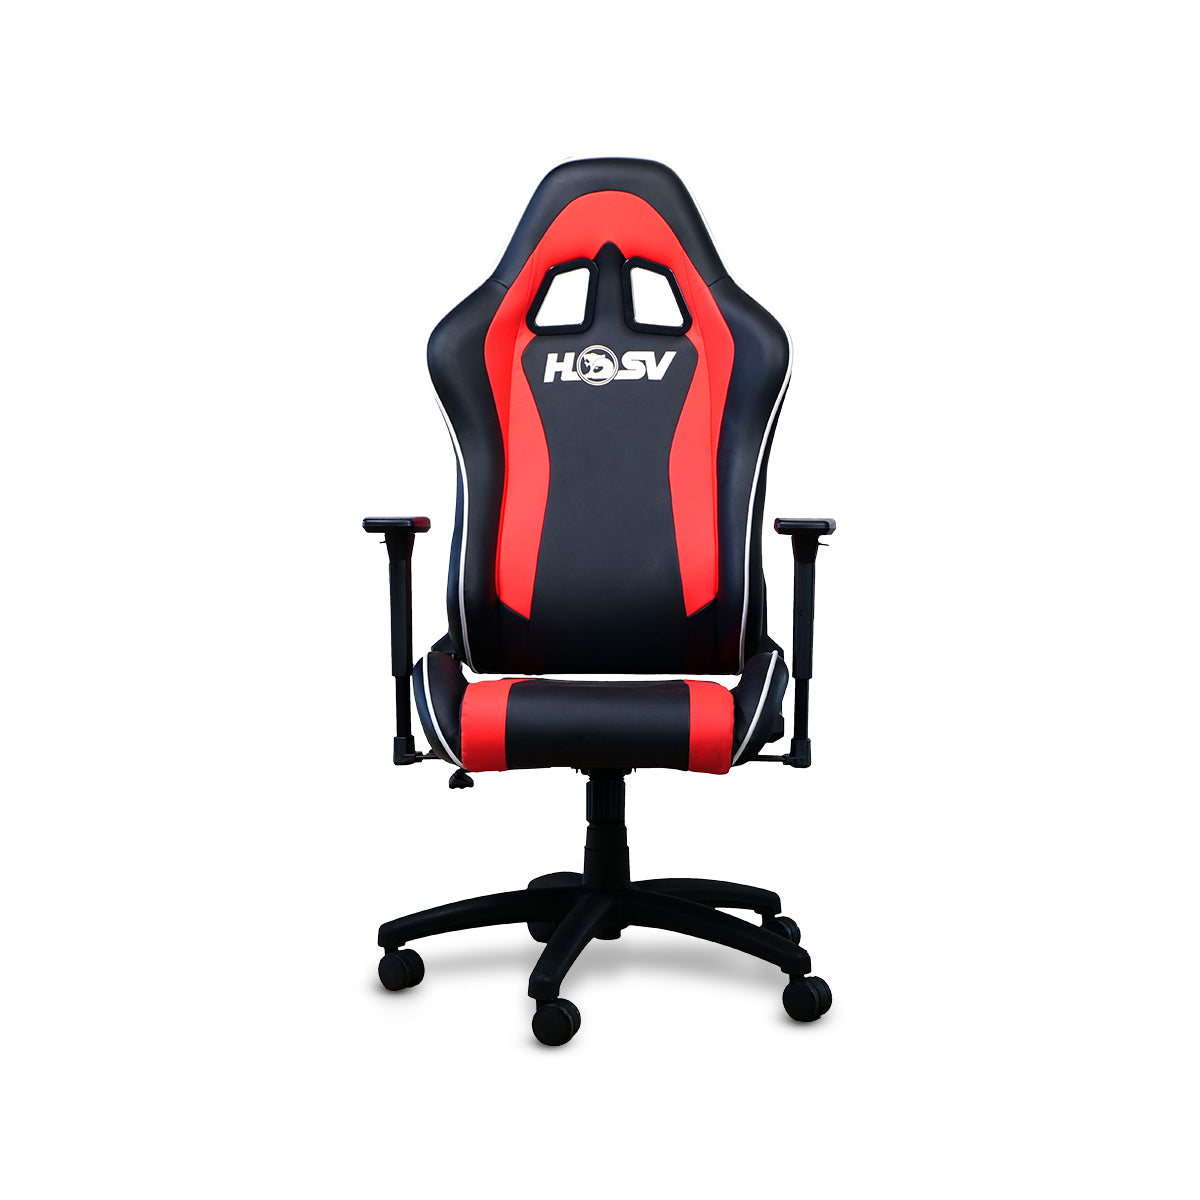 HSV Gaming Chair